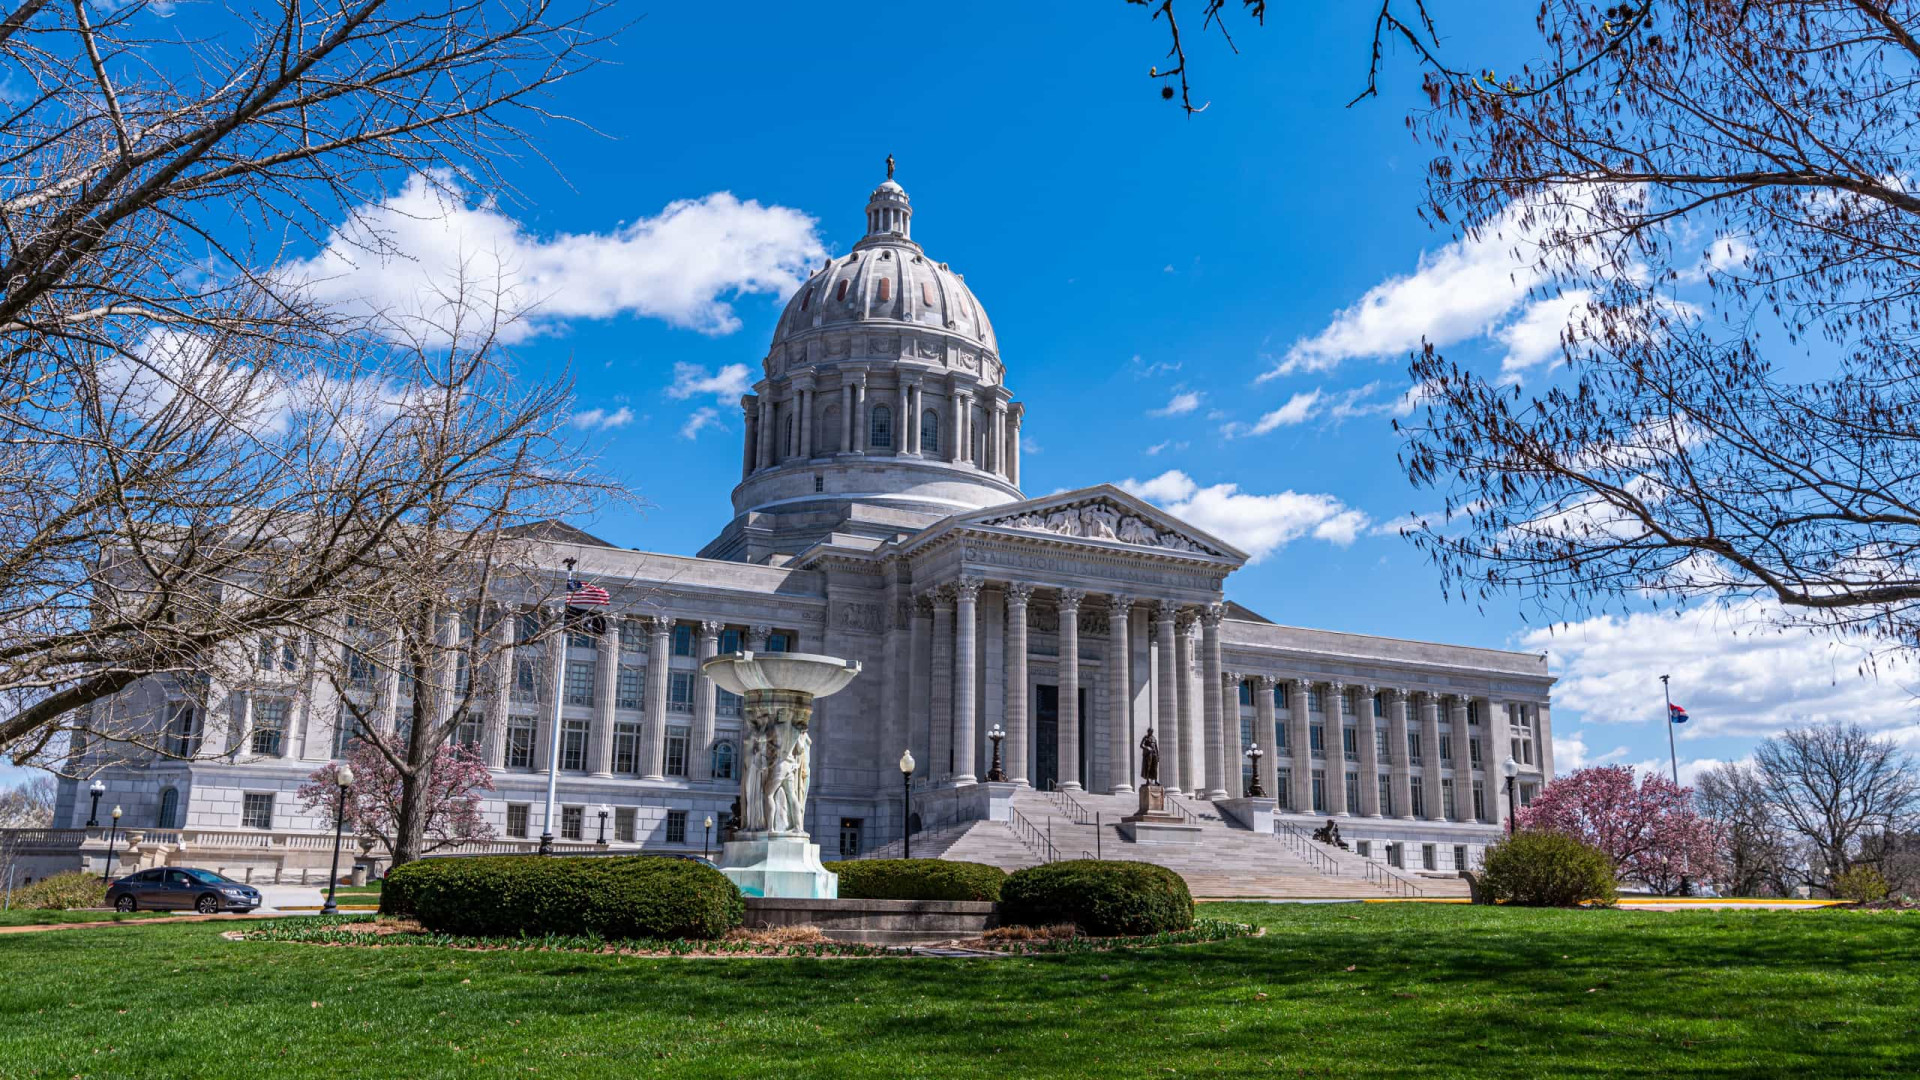 <p>The most striking work of architecture in Jefferson City, the ornate Missouri State Capitol  was built in 1917. Its dome rises 238 feet (73 m) above the ground, making for an imposing sight on the banks of the Missouri River.</p><p><a href="https://www.msn.com/en-us/community/channel/vid-7xx8mnucu55yw63we9va2gwr7uihbxwc68fxqp25x6tg4ftibpra?cvid=94631541bc0f4f89bfd59158d696ad7e">Follow us and access great exclusive content every day</a></p>